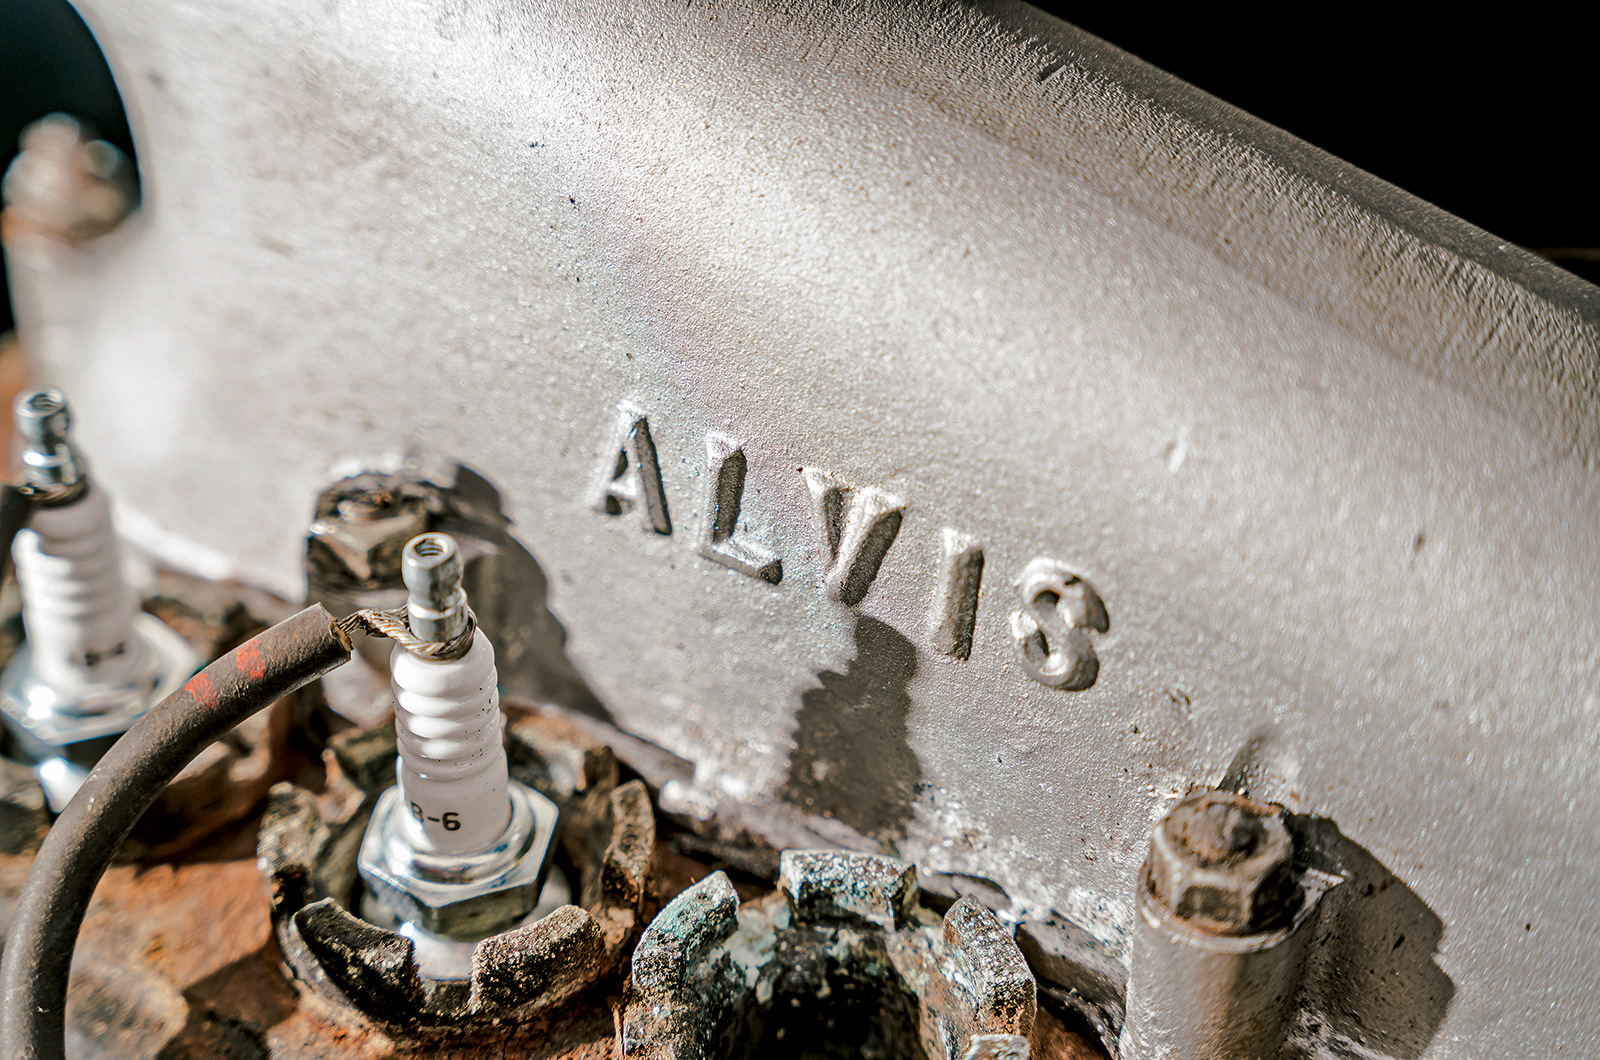 Classic & Sports Car – Alvis 10/30: in the works